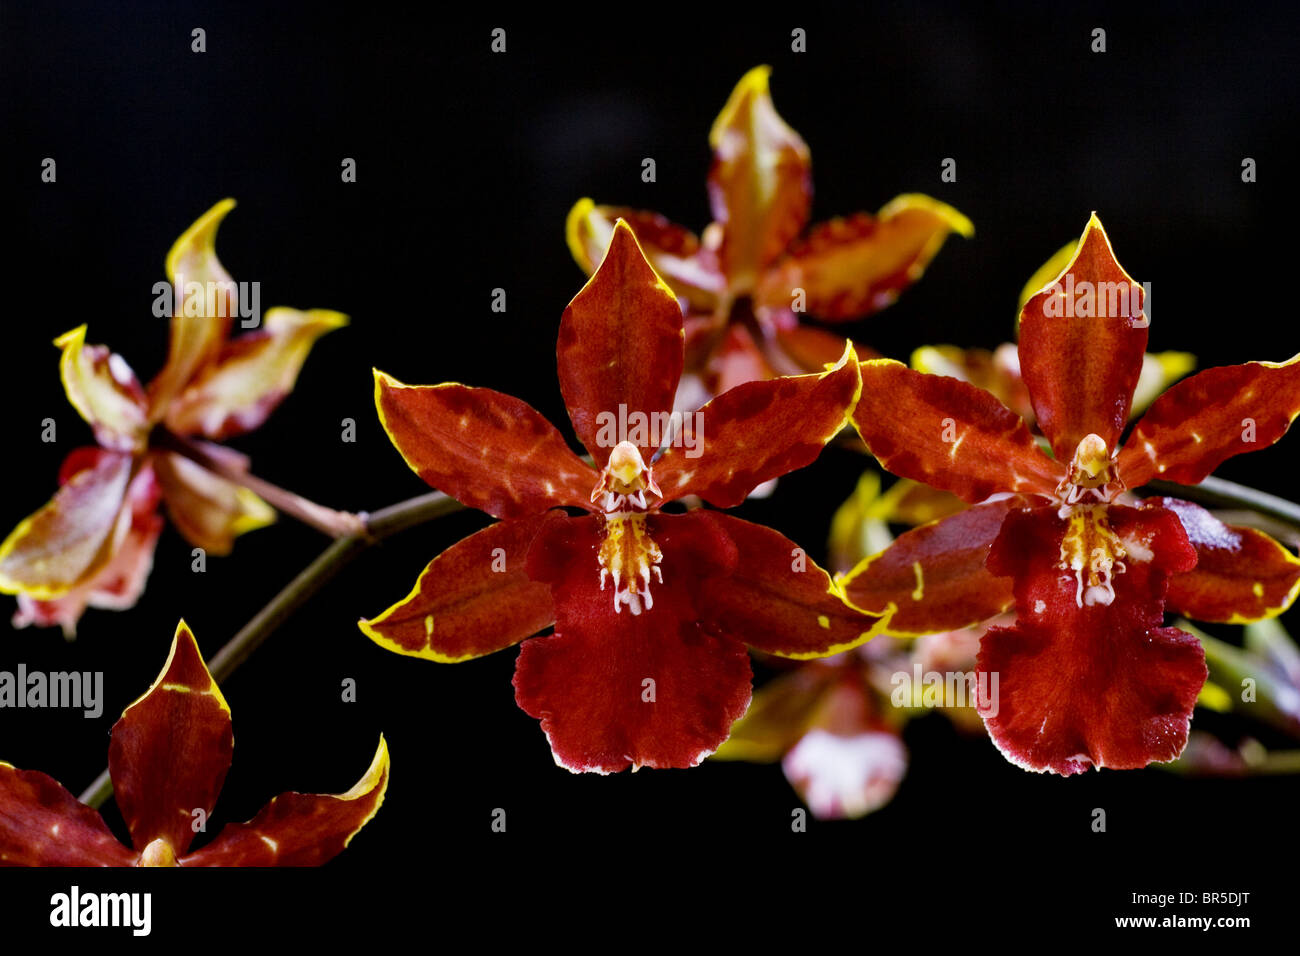 Flowering Oncidium Orchid against a black background Stock Photo